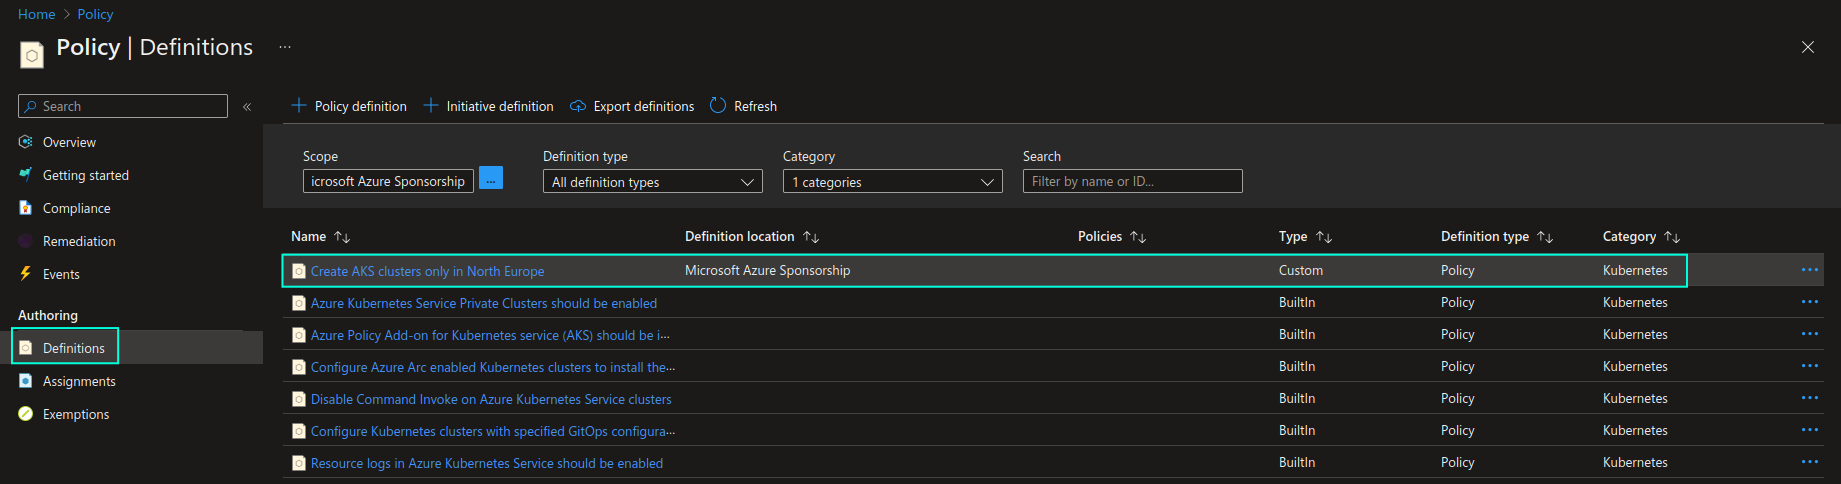 Screenshot of the custom Azure Policy definition included in the list together with built-in Azure Policy definitions